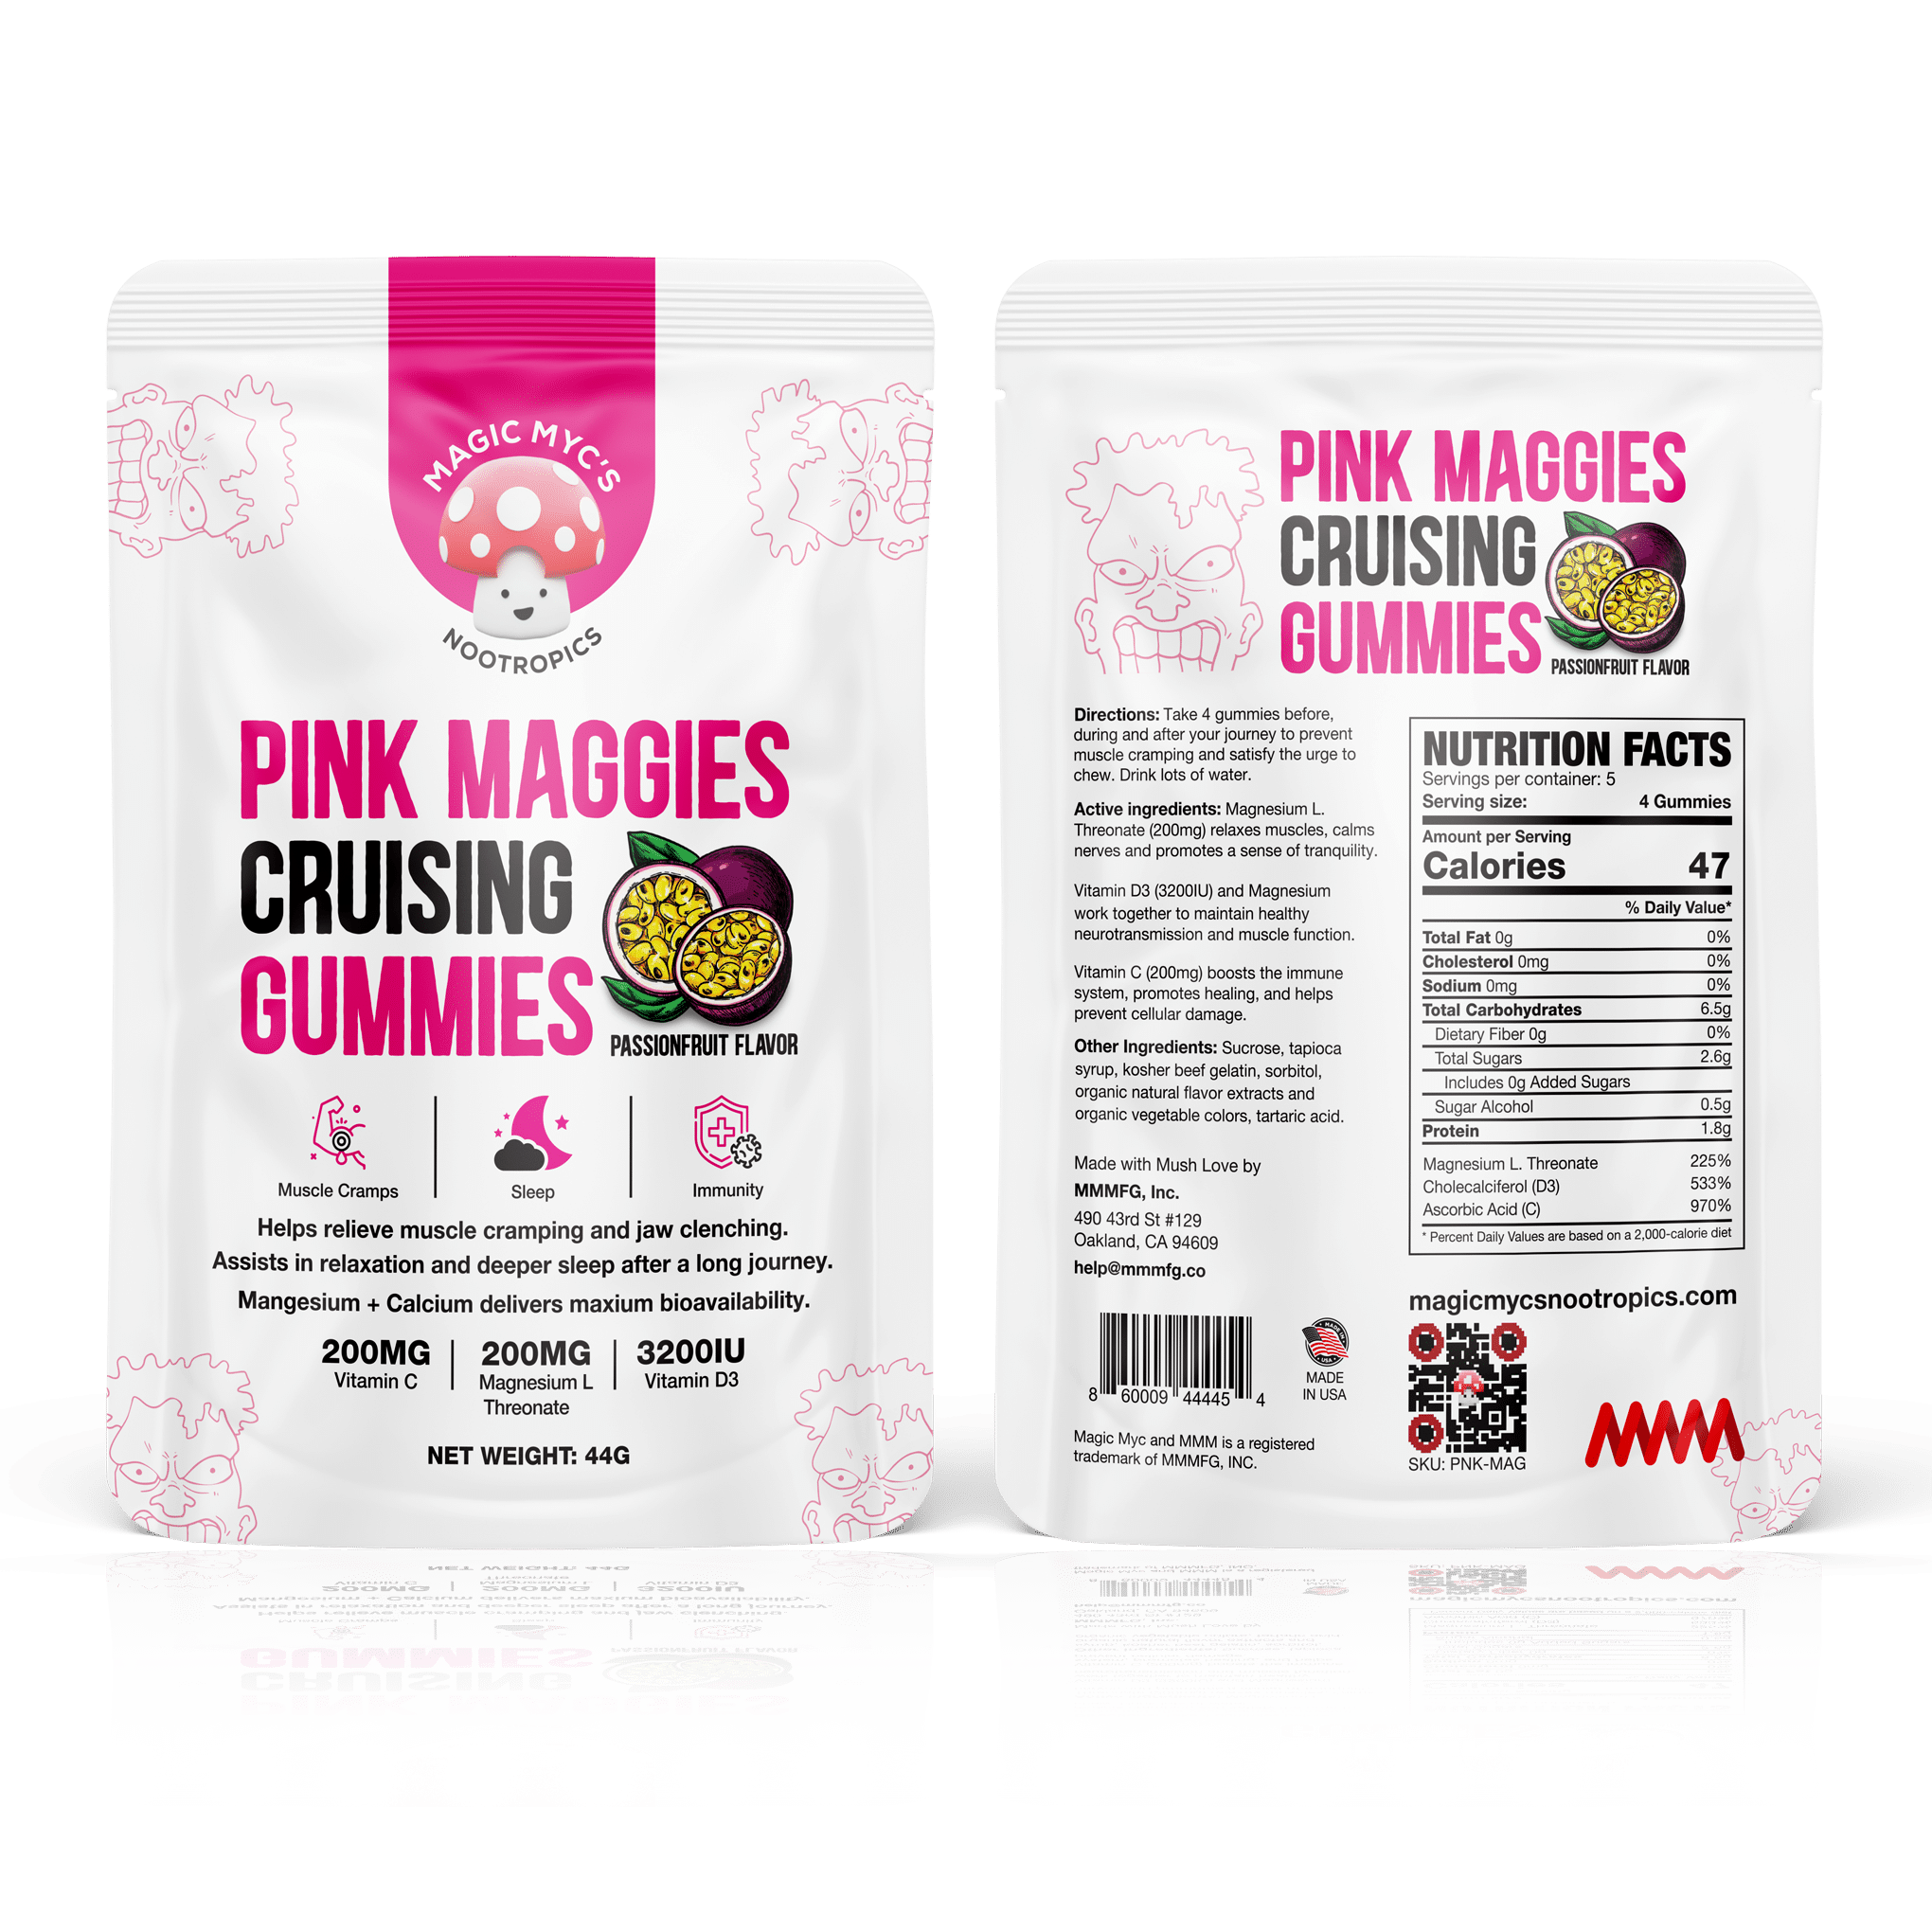 Pink Maggies’ Magnesium Threonate Gummies – Great for Sleep & Muscle Cramps!